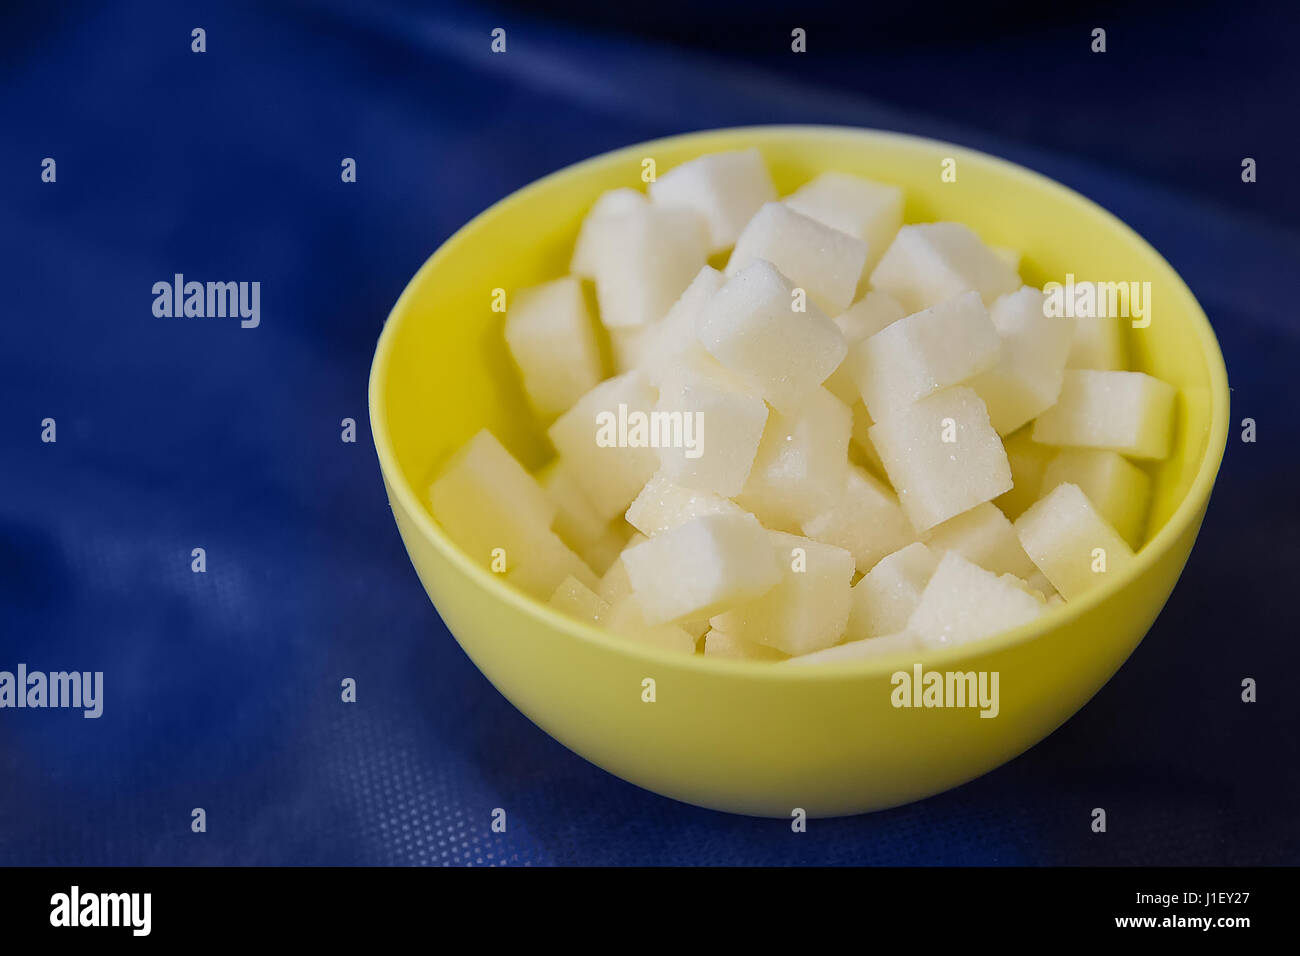 Sugar refined cubes in a yellow plate on a blue table Stock Photo